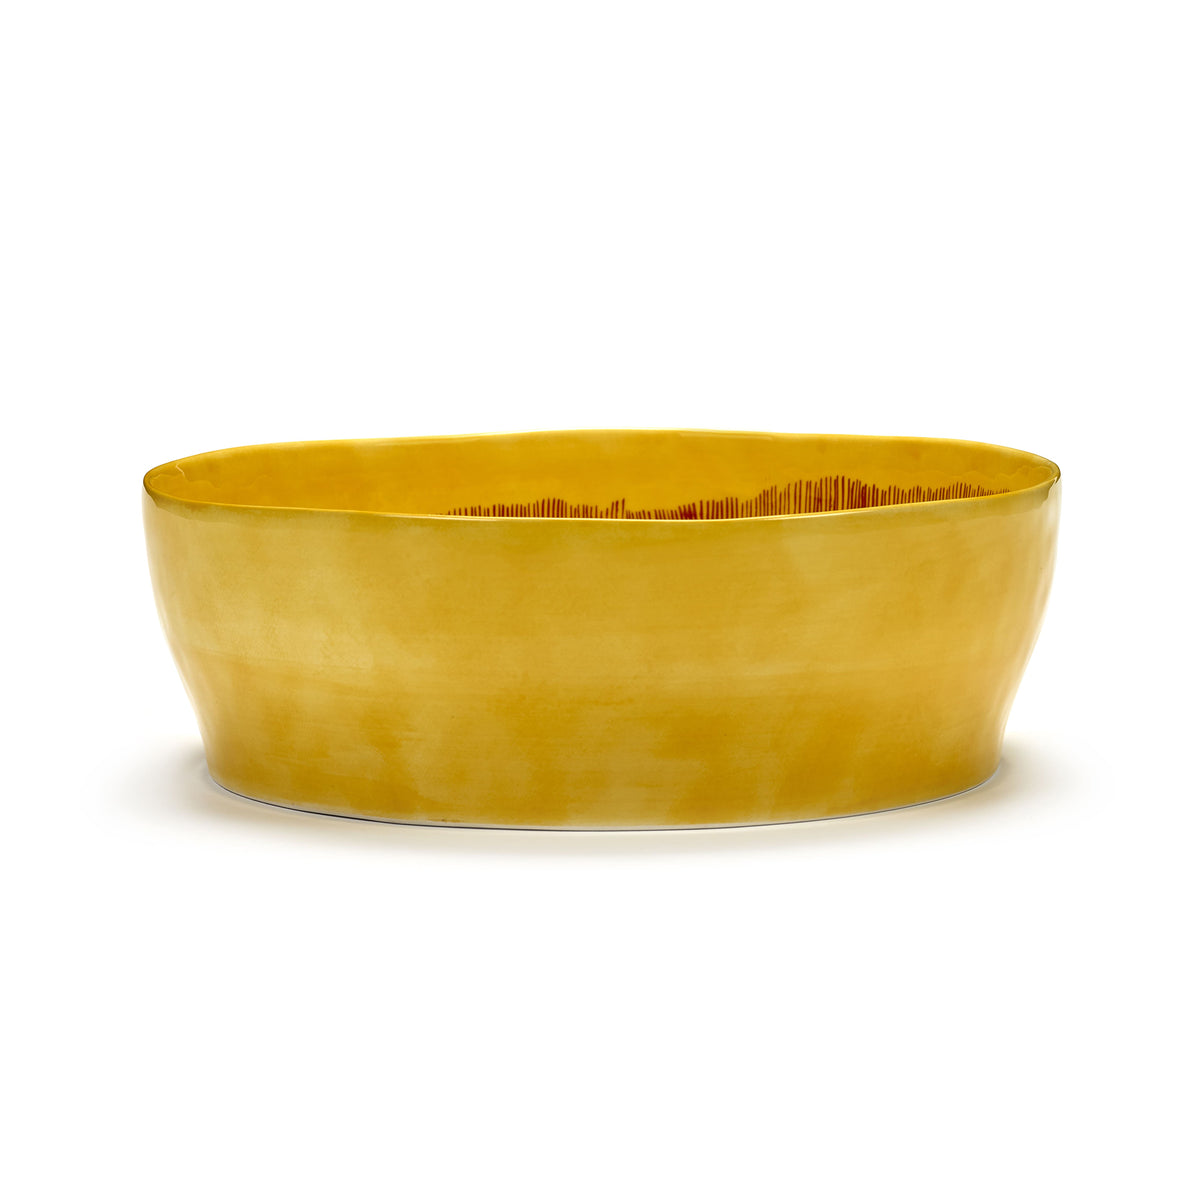 Sunny Yellow Salad Bowl with Red Stripes